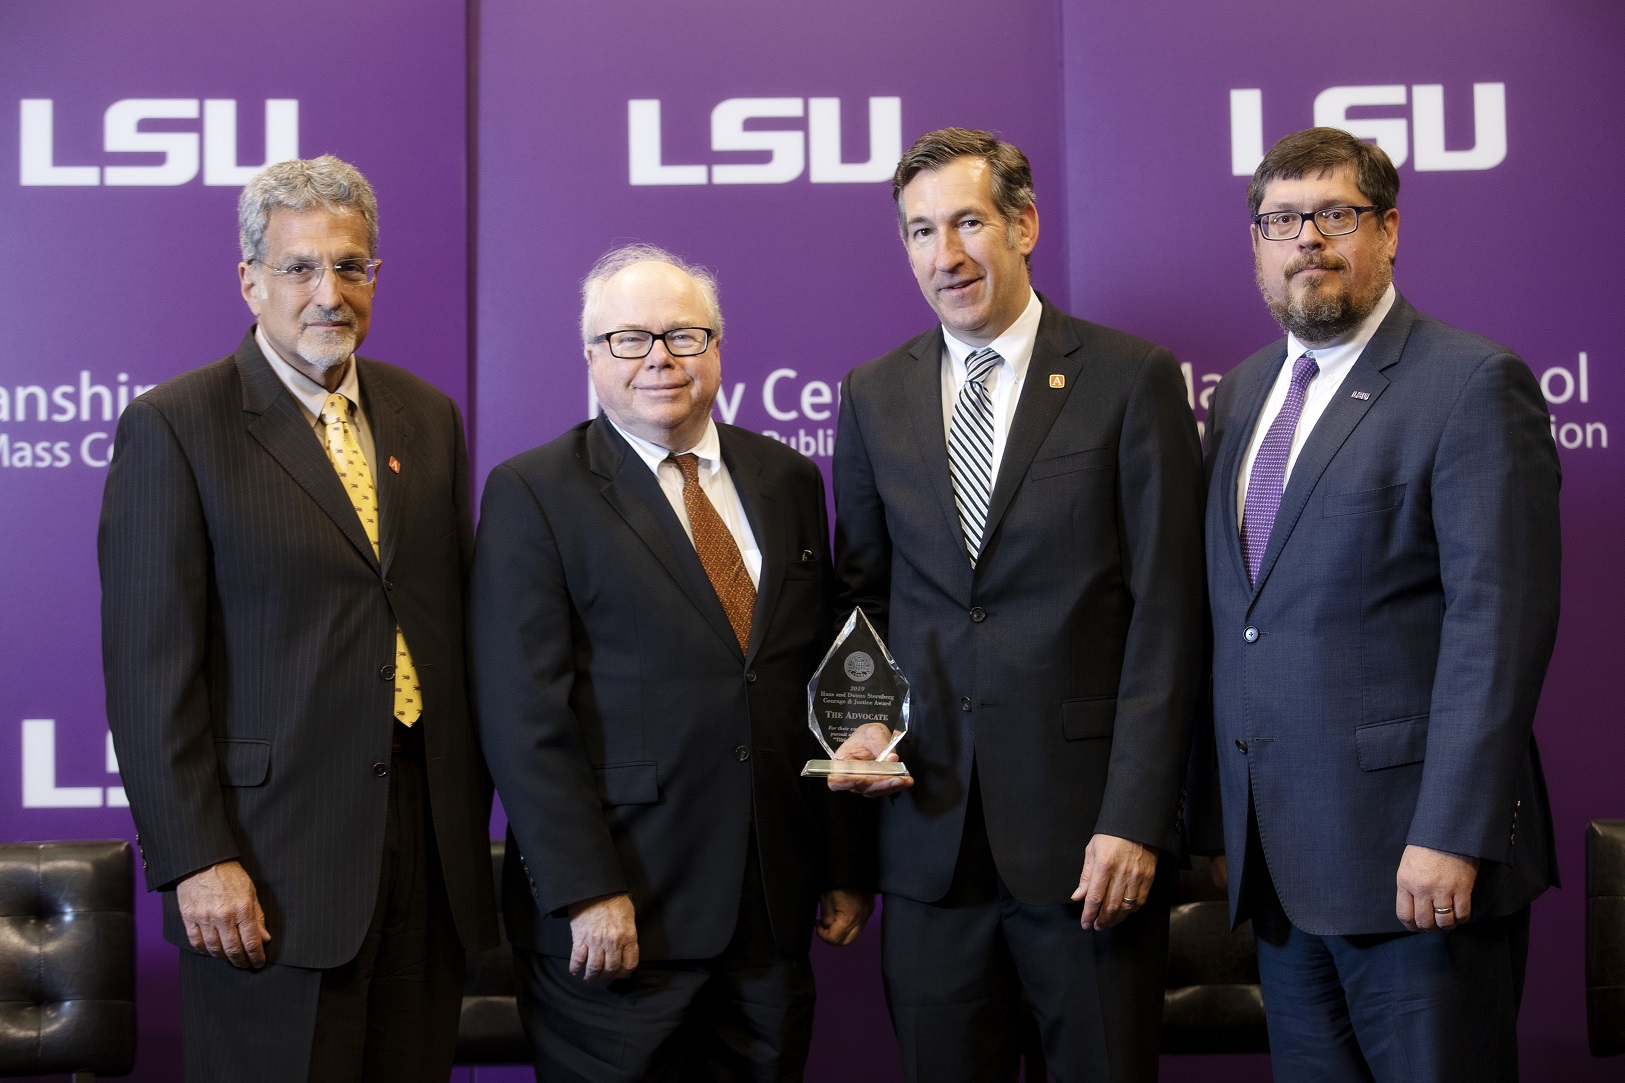 photo shows Advocate staff accepting the Courage & Justice Award: (L to R): Editor Peter Kovacs, Editorial Writer Lanny Keller, Gordon Russell, Managing Editor, Investigations; and Manship School Dean Martin Johnson.